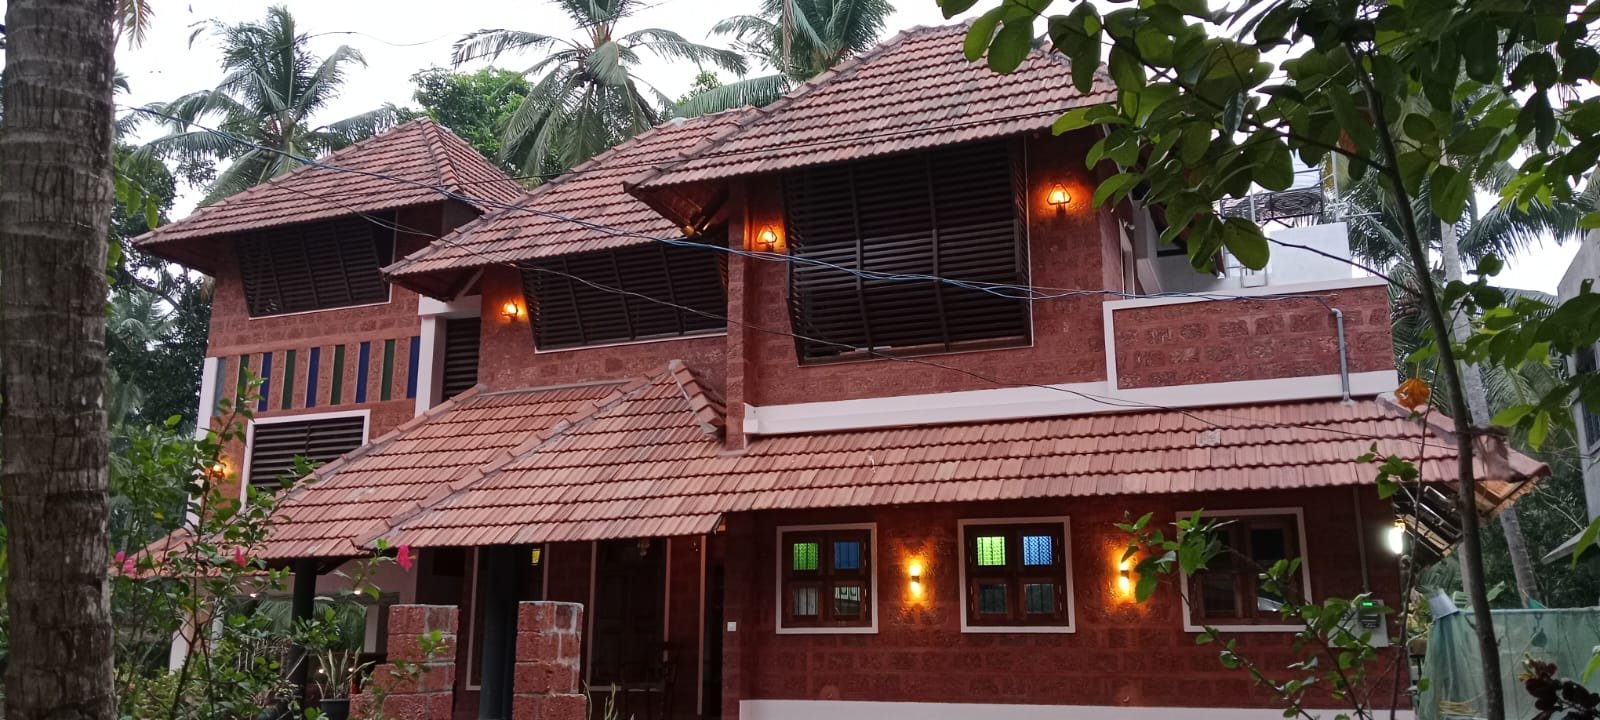 A Kerala Model Traditional House in Guruvayur, Thrissur - Home Pictures